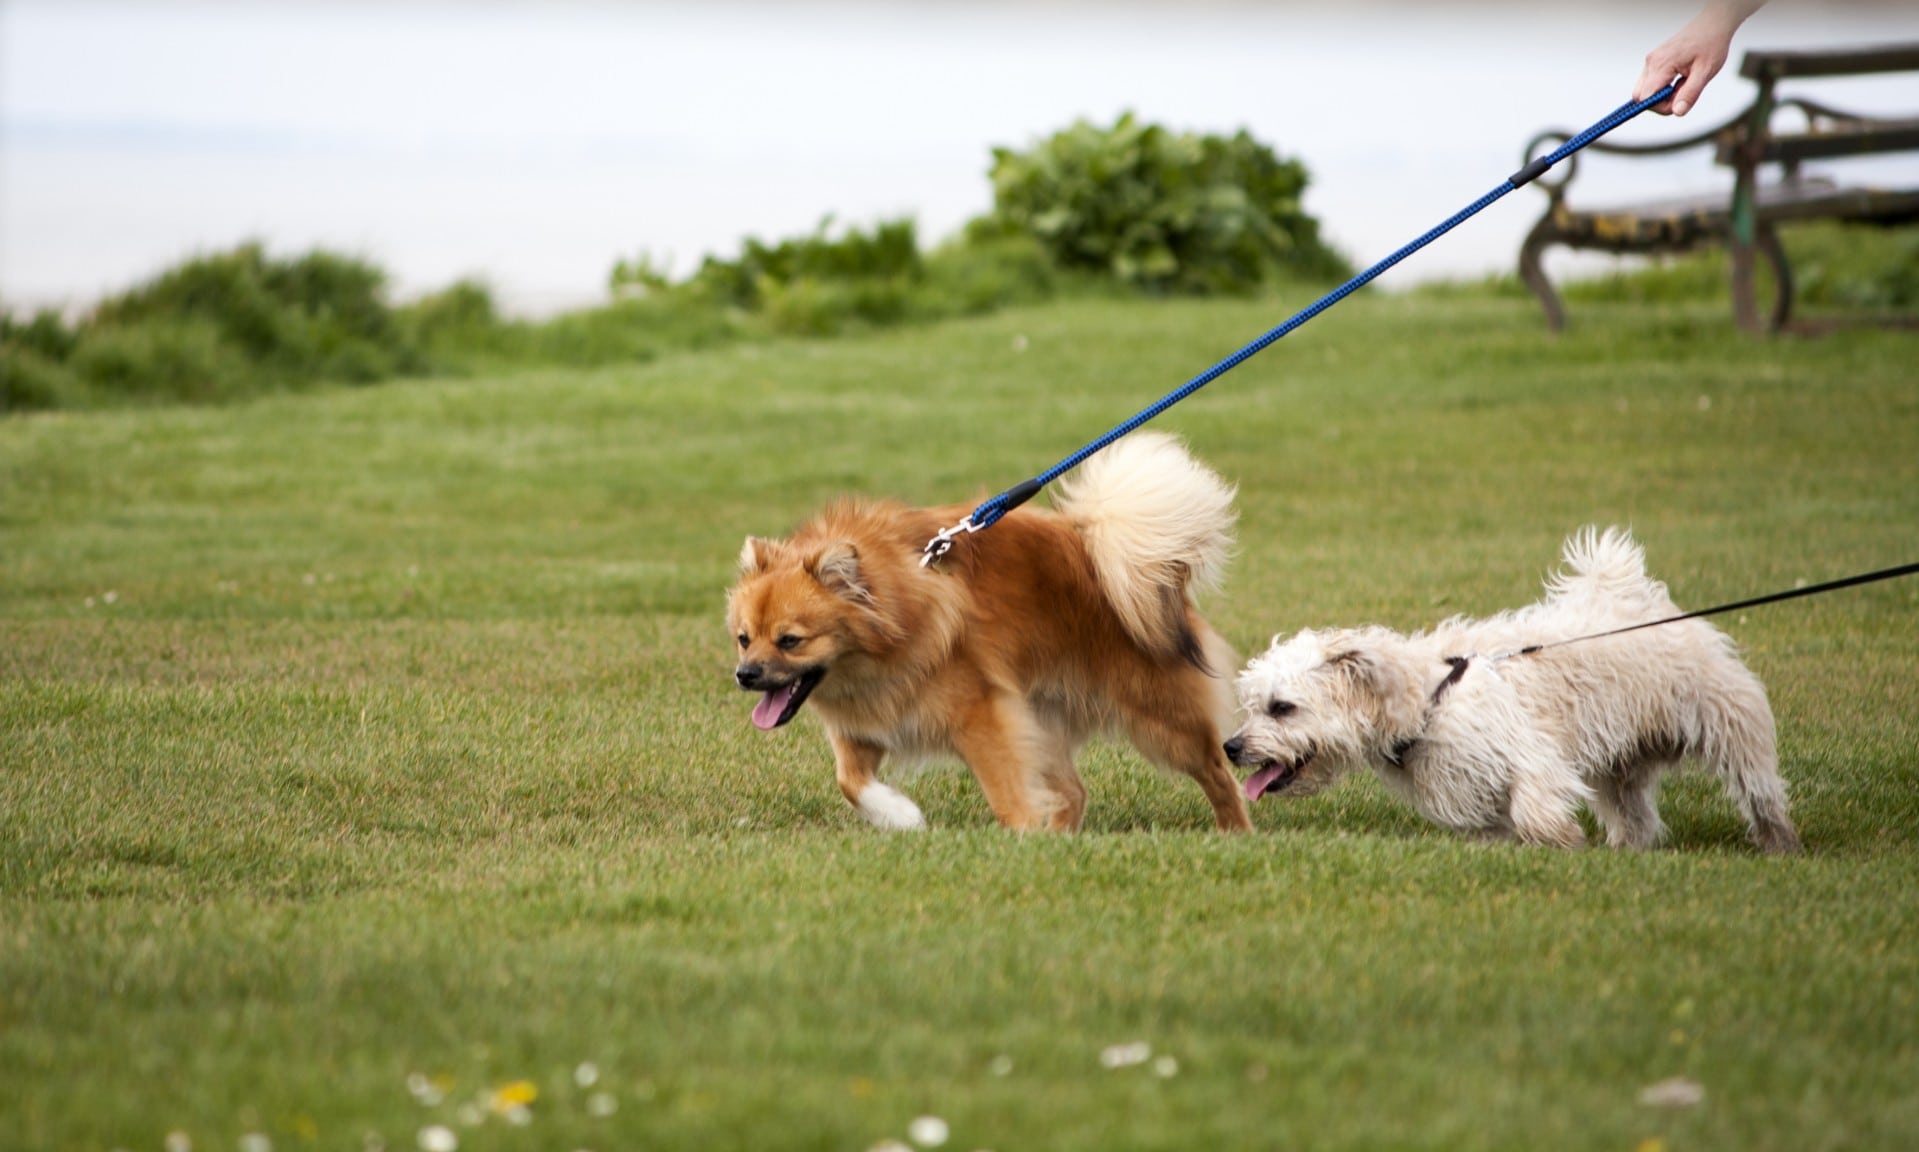 How to stop your dog pulling on lead